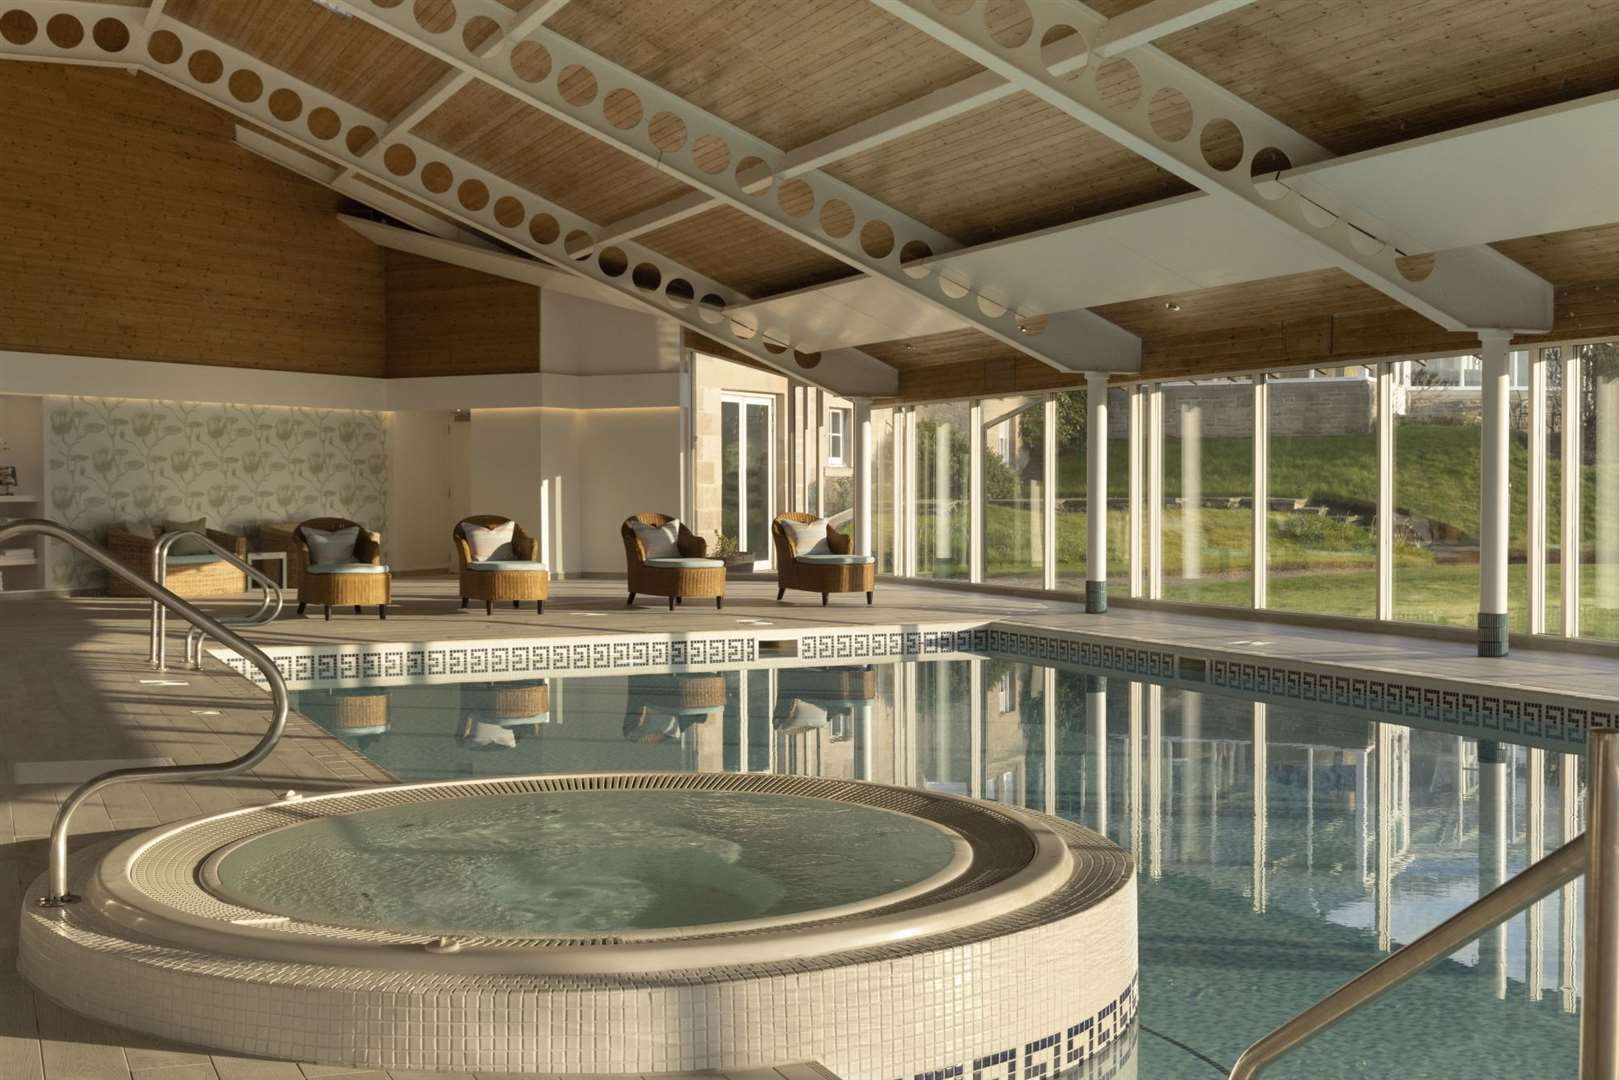 The newly upgraded pool in the spa.